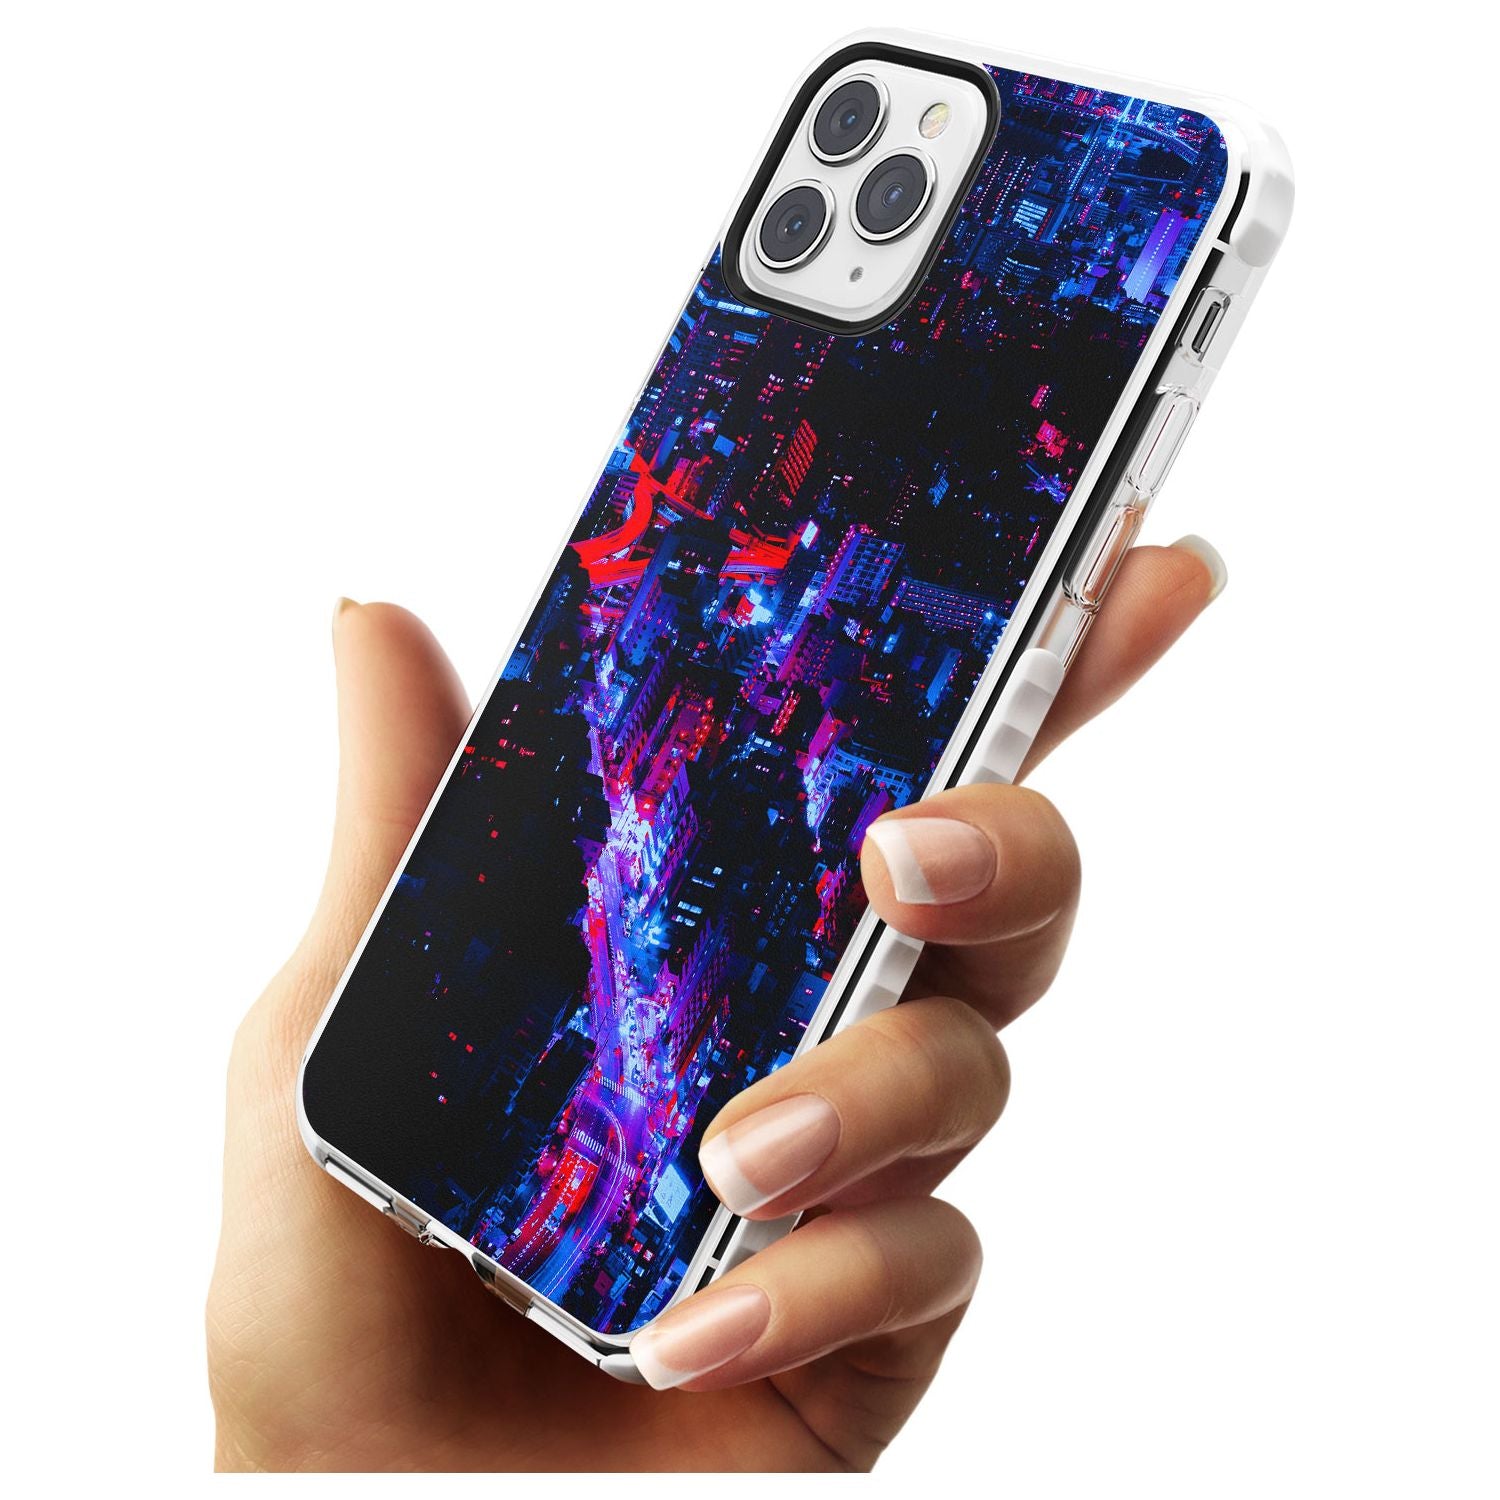 Arial City View - Neon Cities Photographs Impact Phone Case for iPhone 11 Pro Max